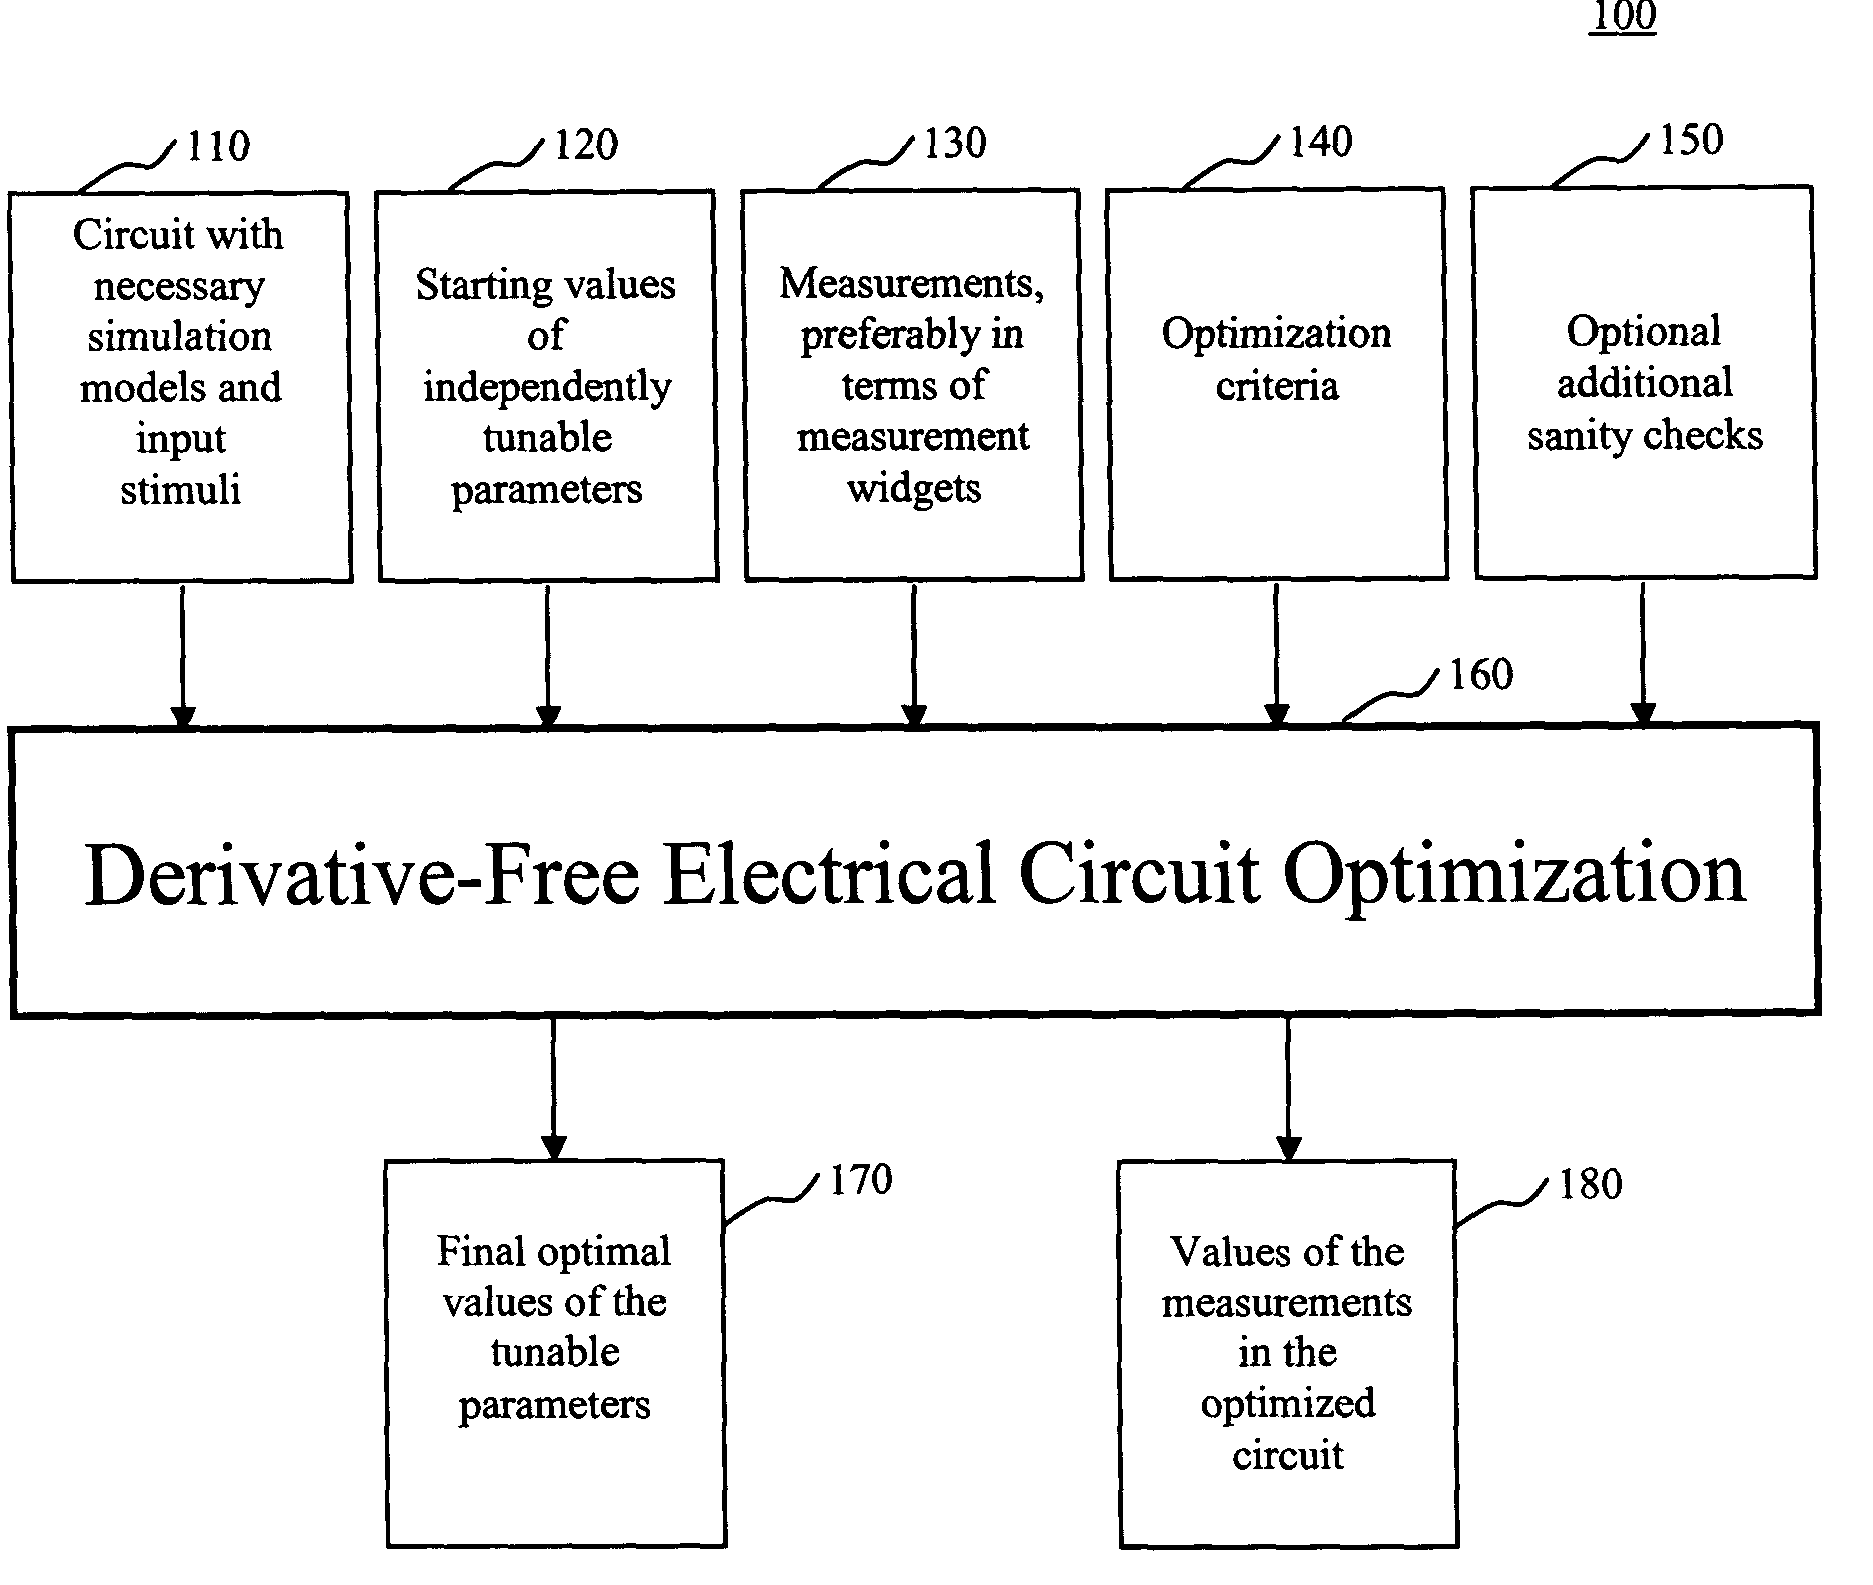 System and method for derivative-free optimization of electrical circuits